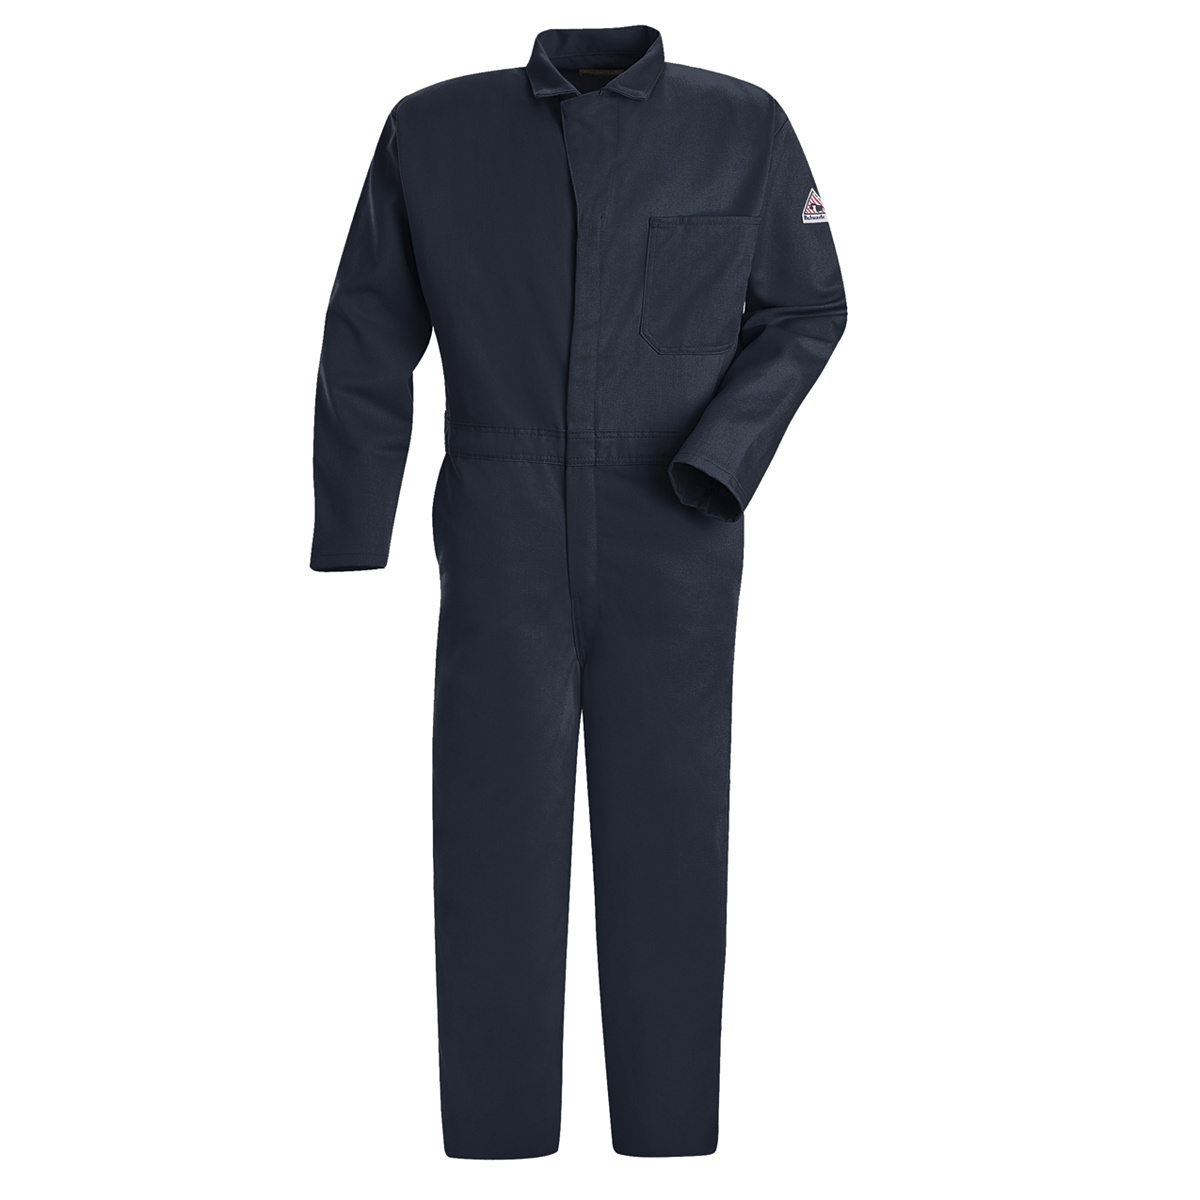 Bulwark® 62 Short Navy Blue EXCEL FR® Twill Cotton Flame Resistant Coveralls With Zipper Front Closure